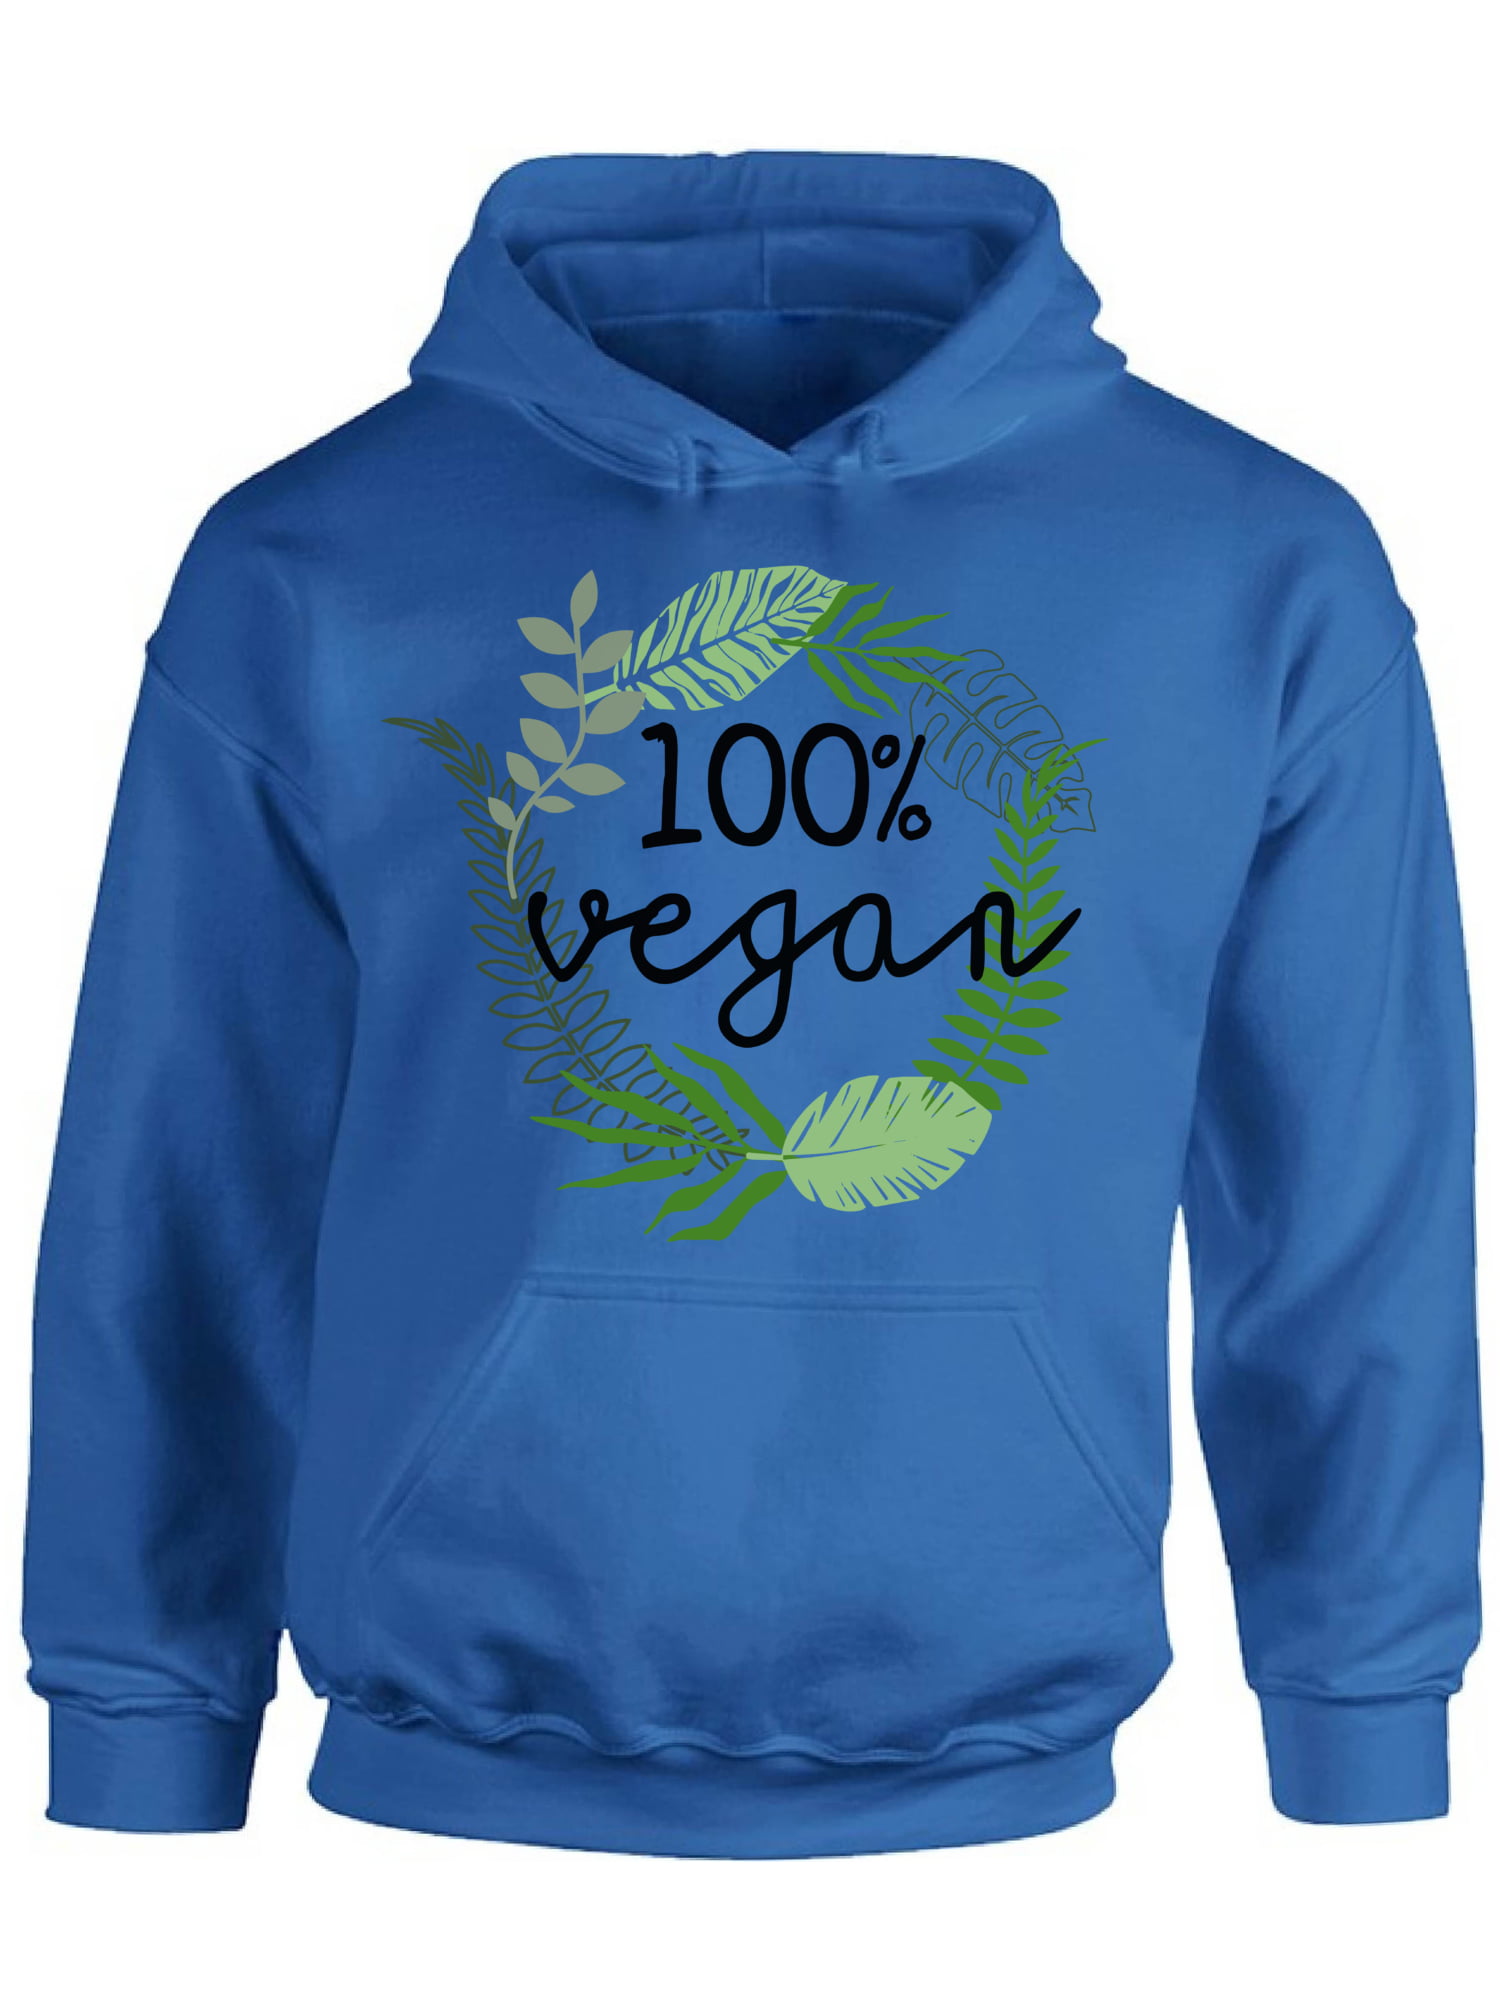 Inspirational Positive Phrase Christmas Blessed Gift Xmas Gift Fleece Pullover Hoodie